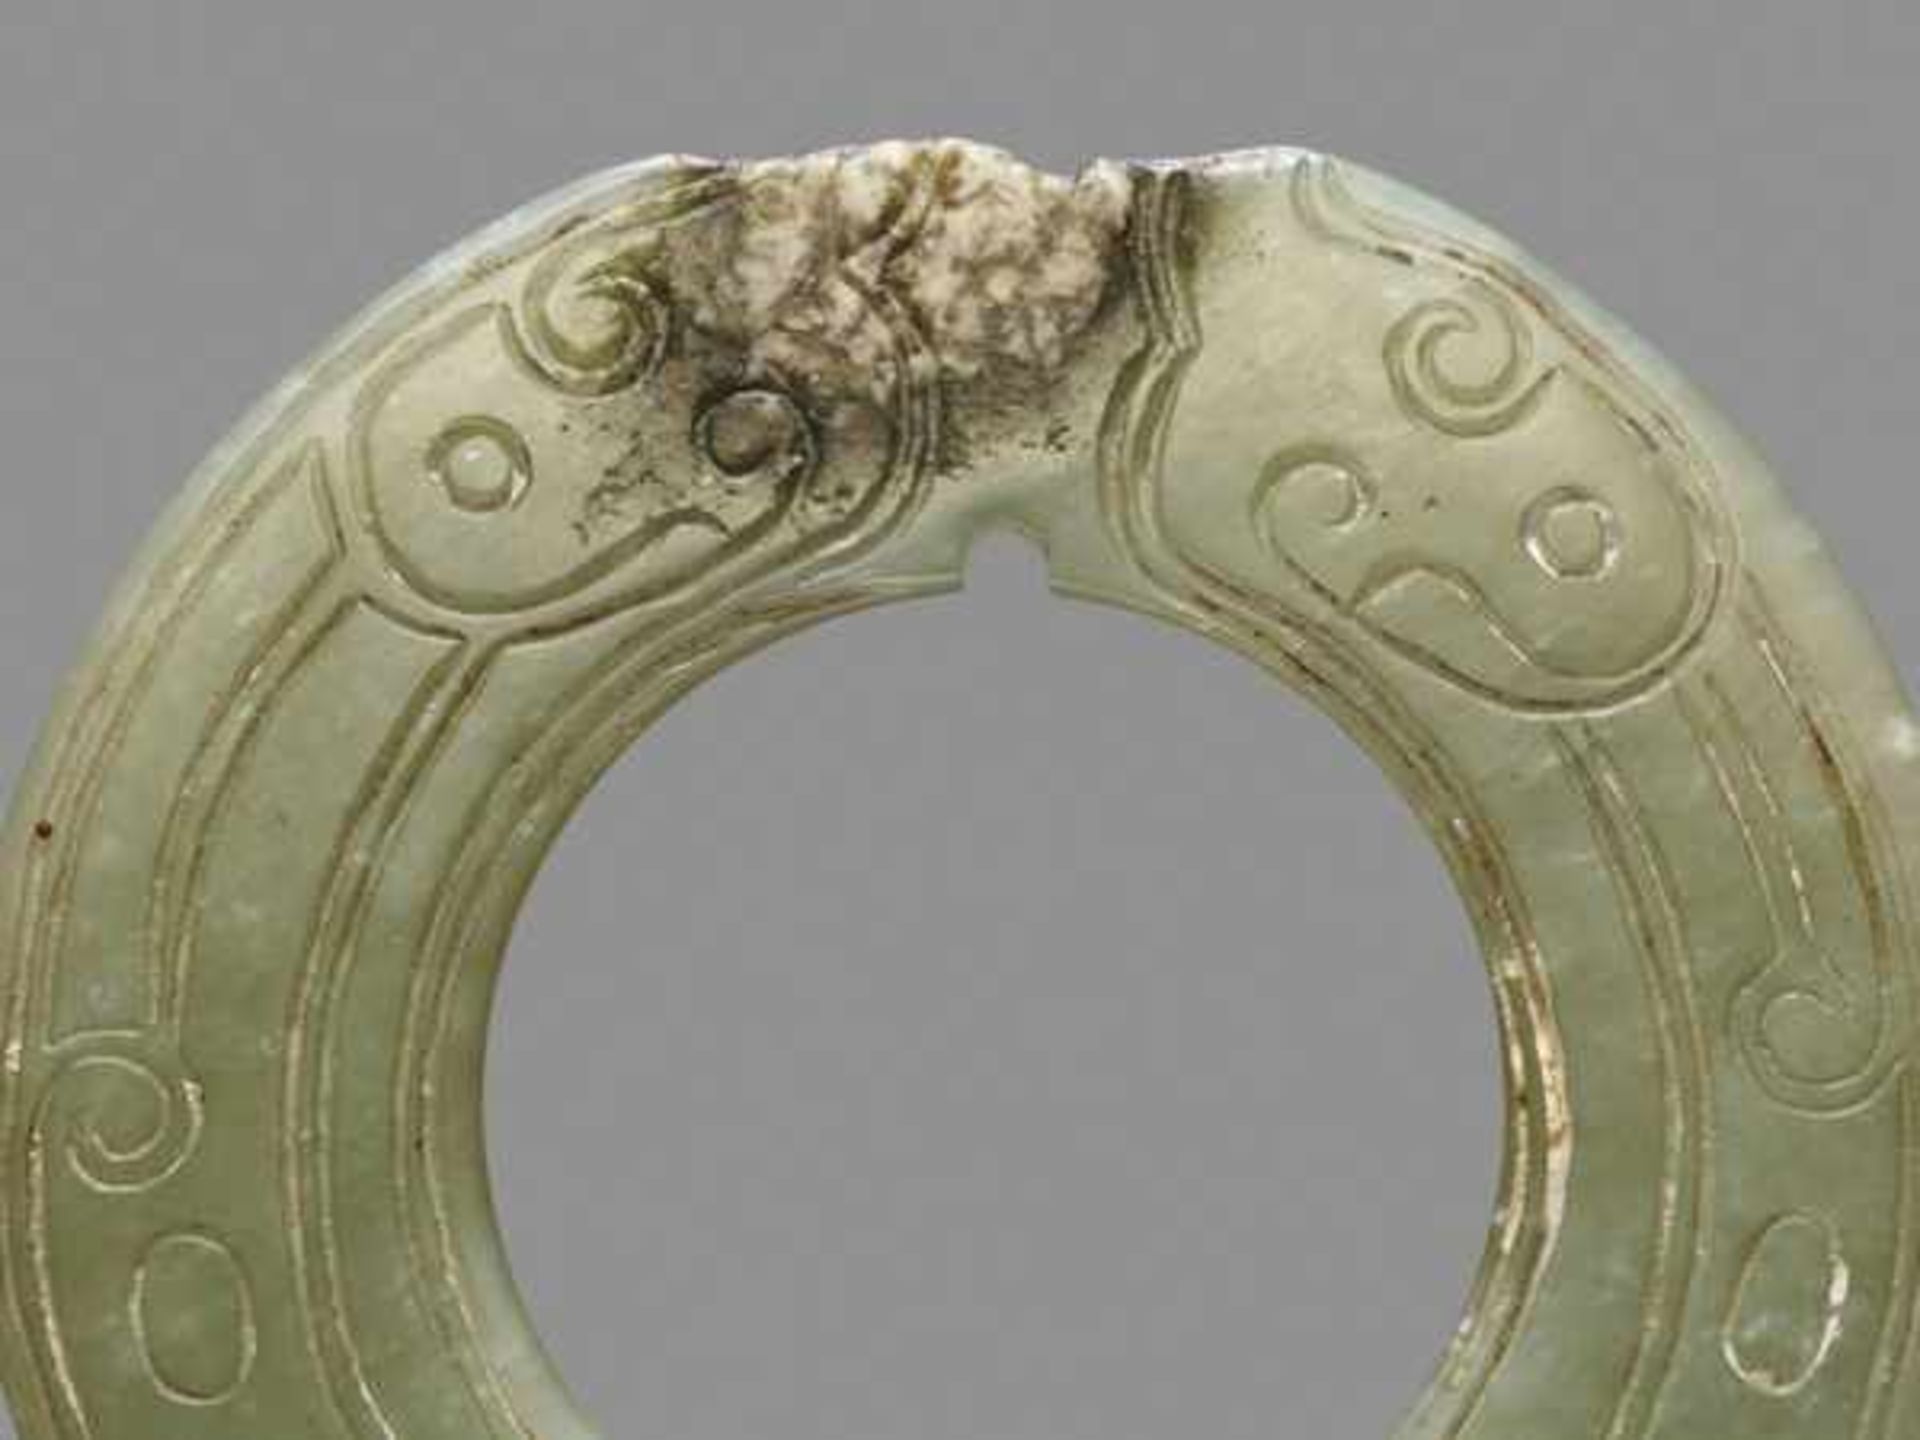 THIN AND DELICATE GREEN JADE RING WITH AN INCISED PATTERN OF STYLIZED DRAGONS Jade, China. Late - Image 4 of 6